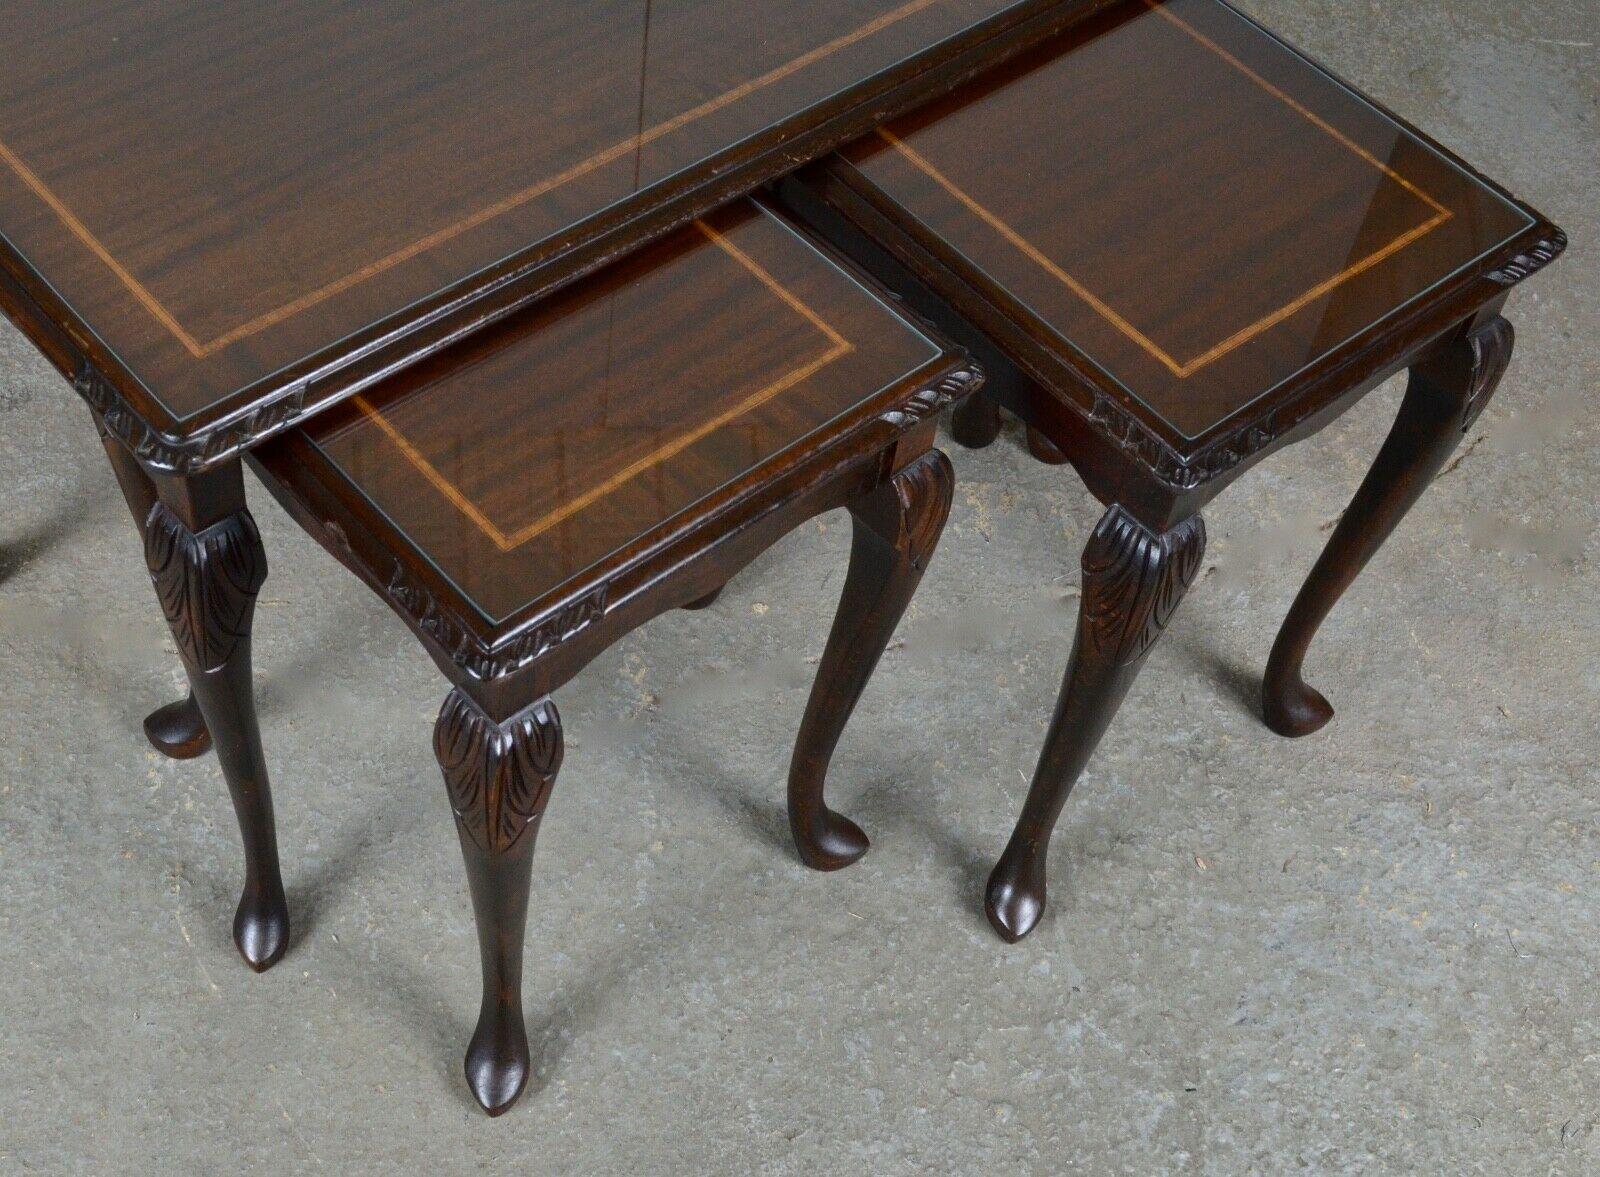 We are delighted to offer for sale this lovely antique Victorian mahogany nest of three tables. The tables have turned column bases and carved top edge and are in good condition. 

DIMENSIONS 

Height : 48cm
Width: 77.5cm
Depth: 42cm

Small